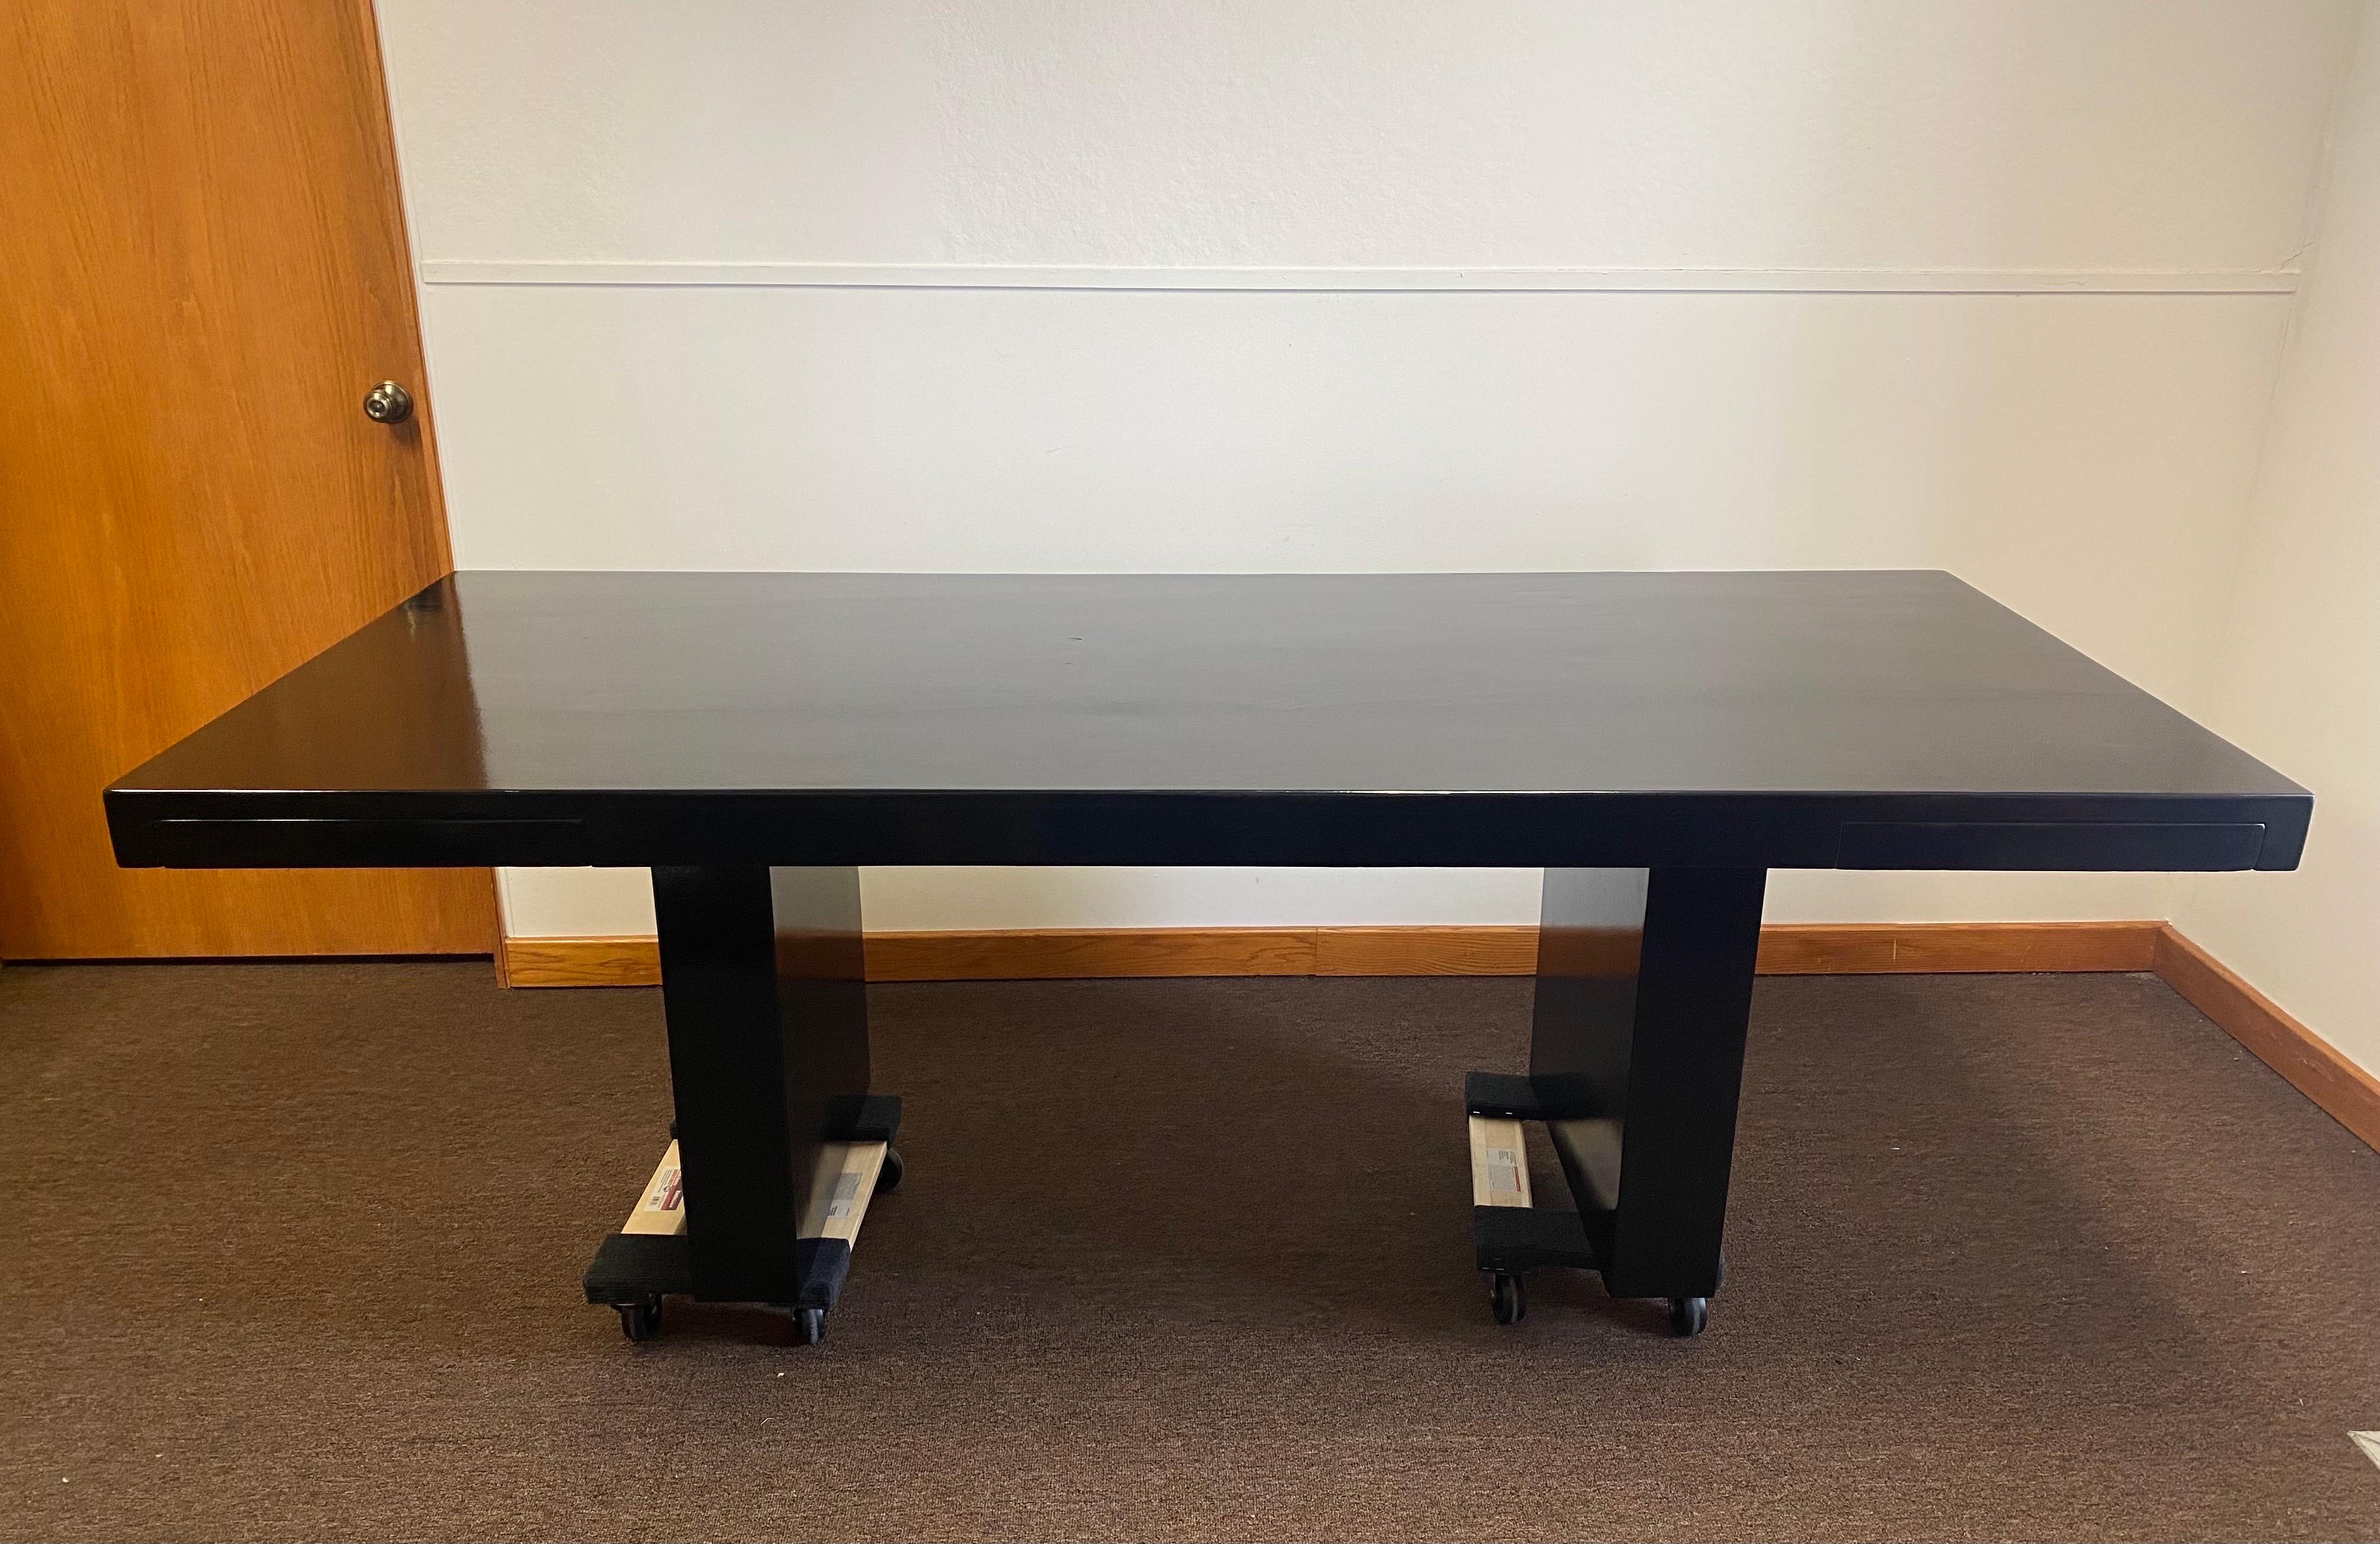 We are very pleased to offer a stunning yet sleek, desk by Roger Sprunger for Dunbar, circa the 1970s. Striking in its simplicity, this seven-feet long desk is where streamlined design meets modern elegance. The thick frame showcases a black paint